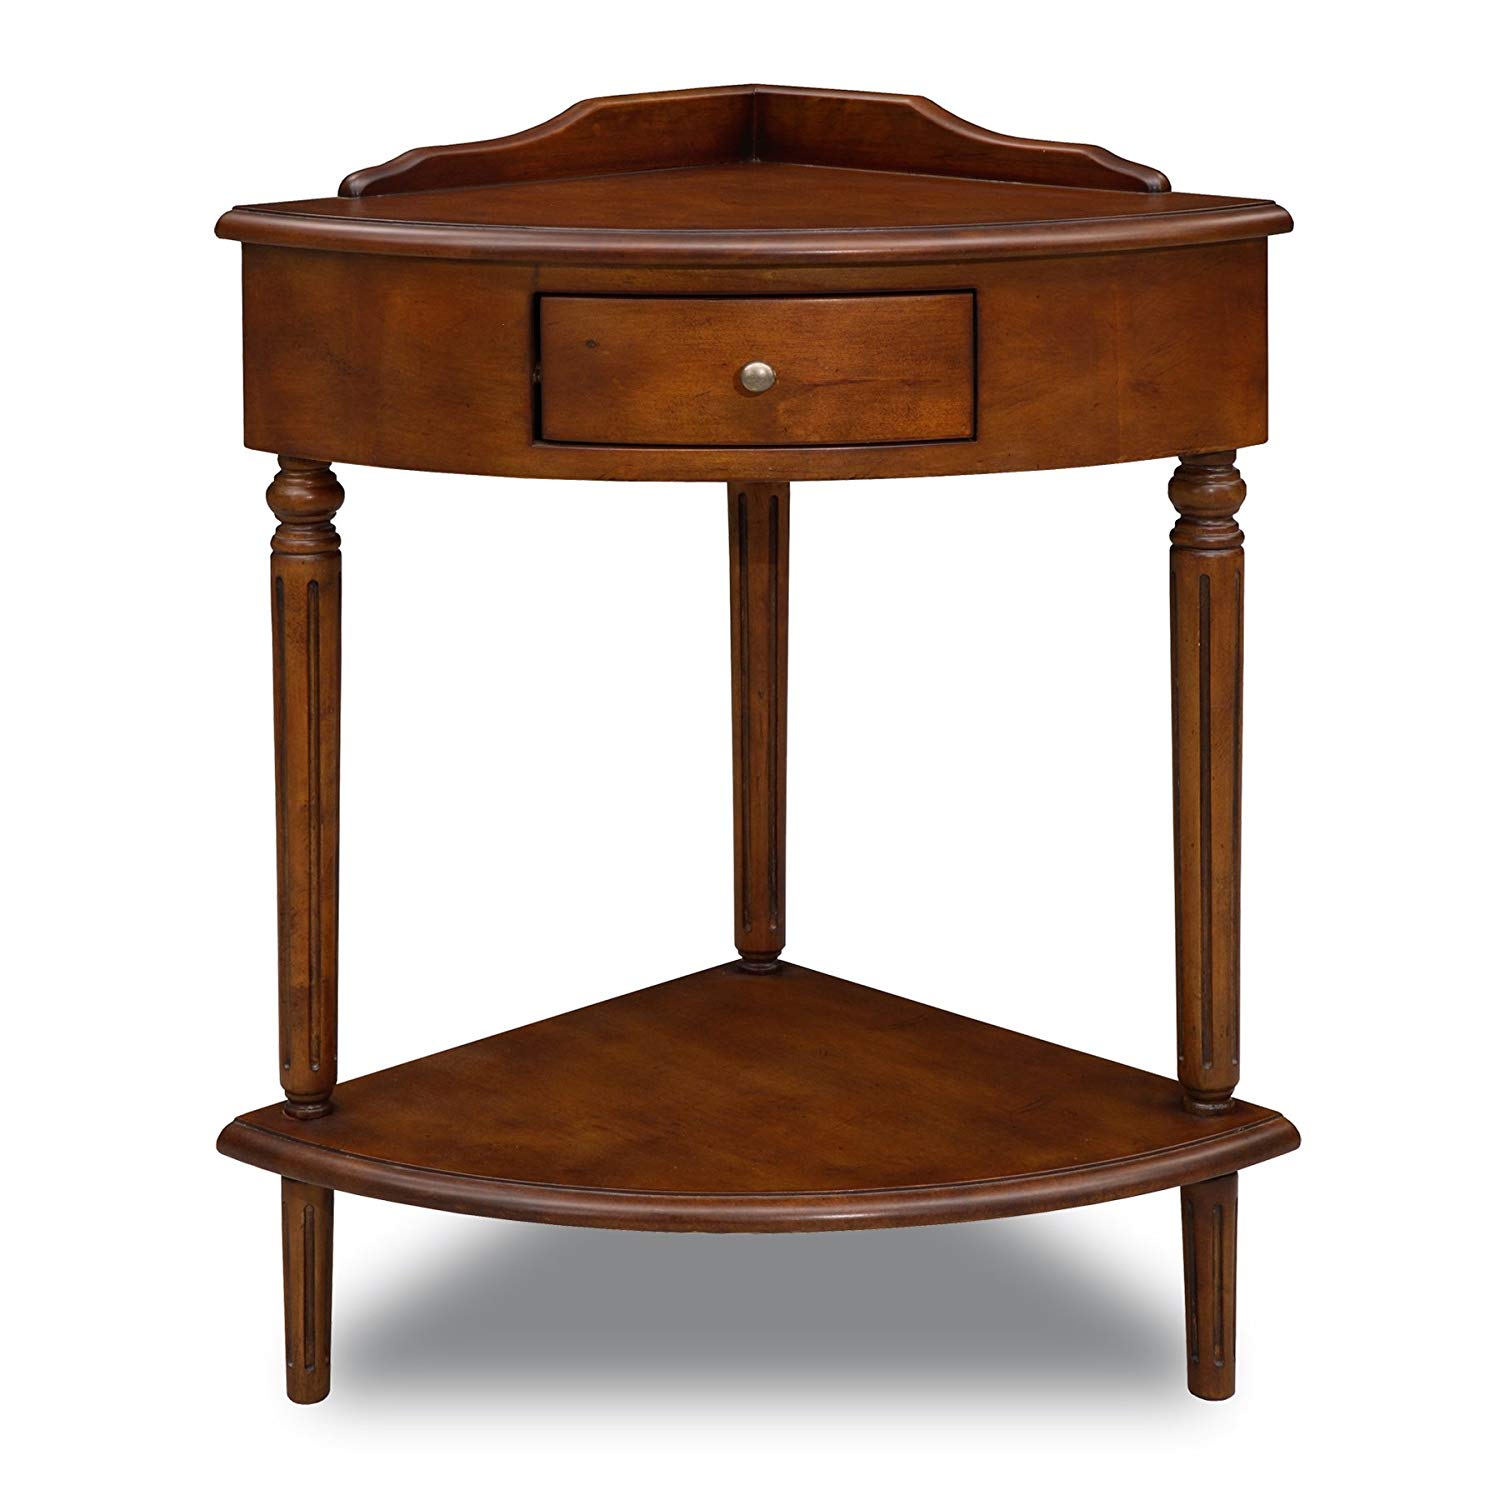 leick corner accent table kitchen dining uql cherry bedroom furniture dark wood end tables with drawer and door long skinny entry tiffany lighting collections round oak old style